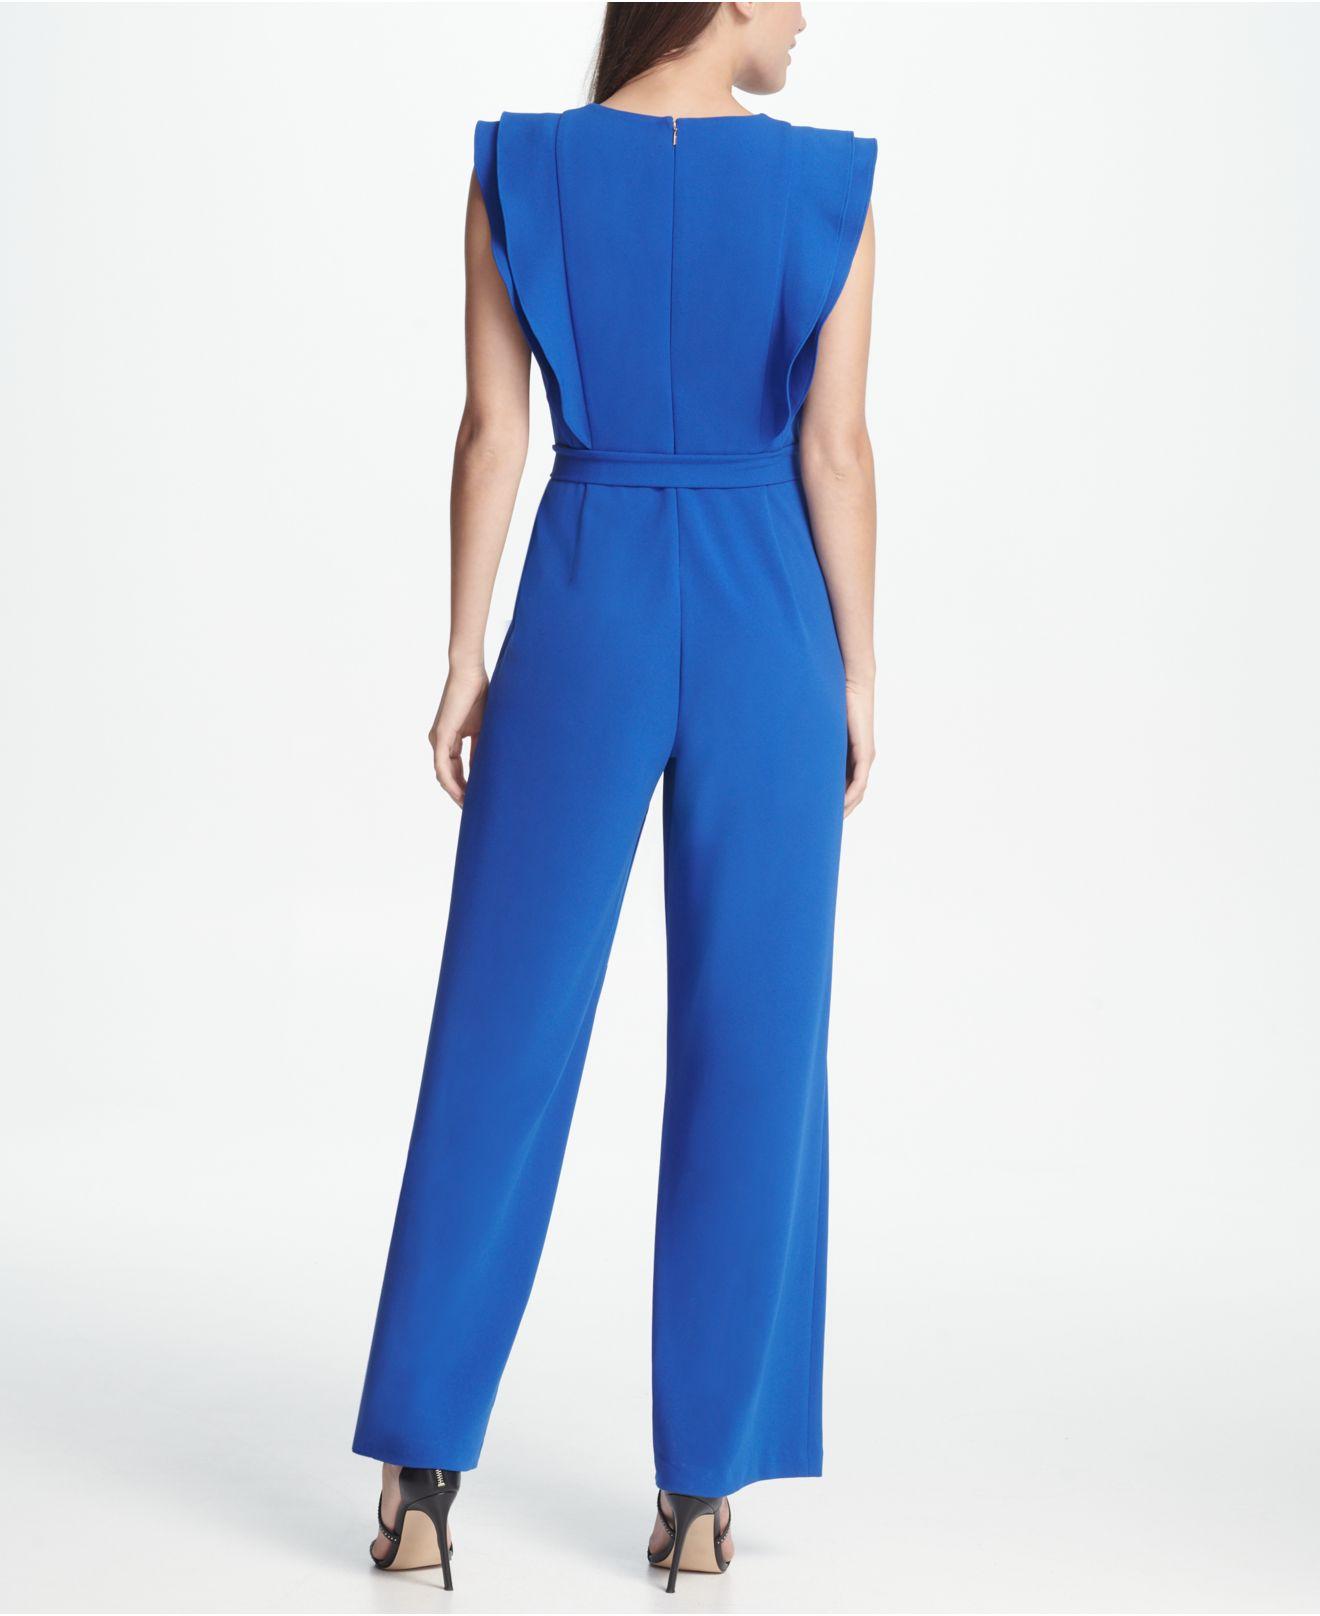 DKNY Synthetic Ruffle Detail Jumpsuit in Blue - Lyst